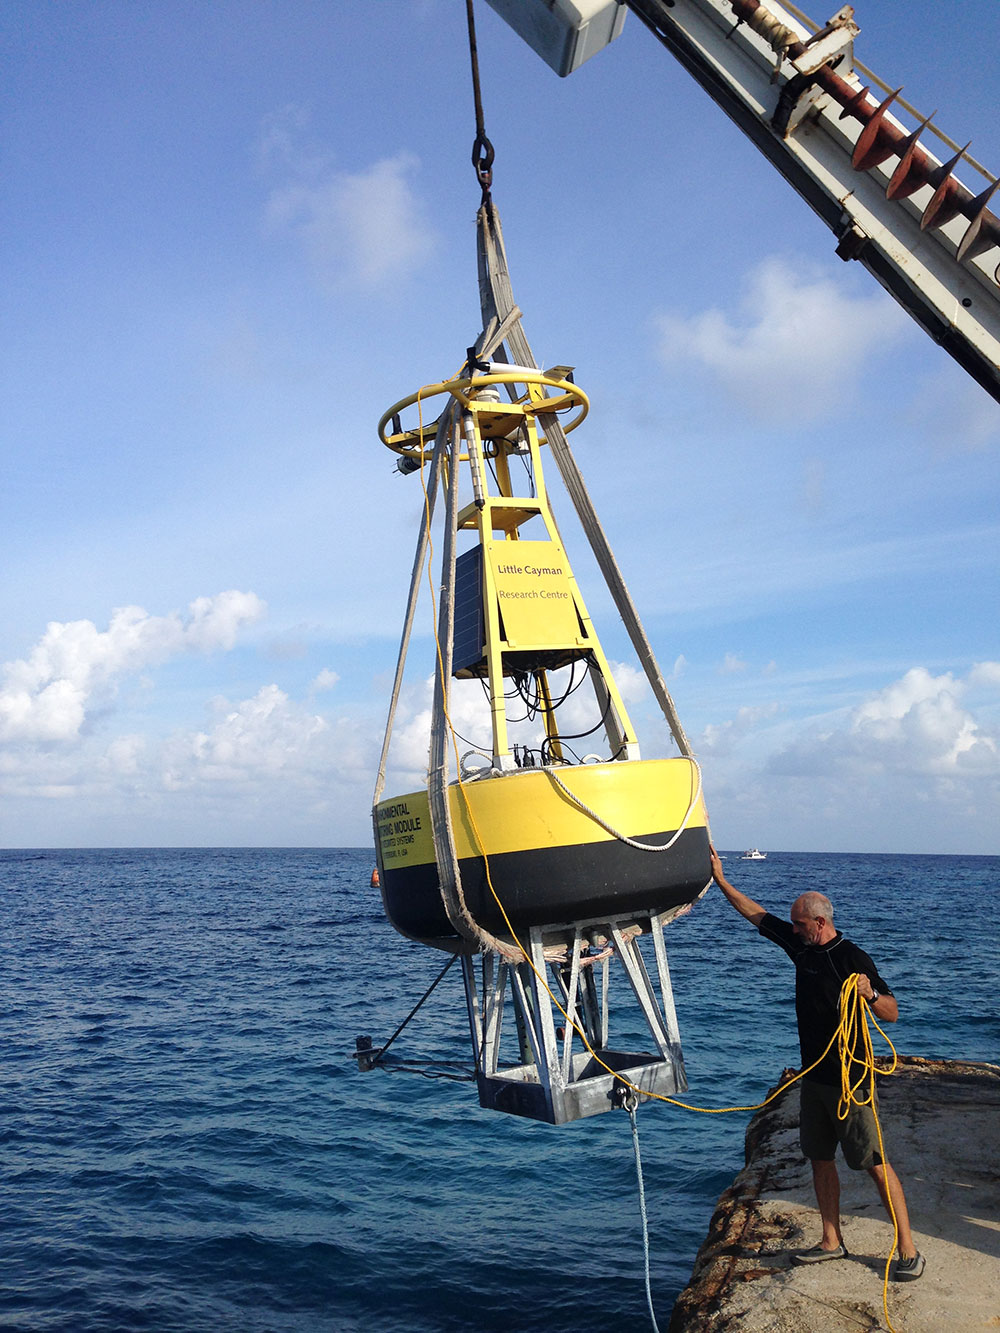 Researchers with the Central Caribbean Marine Institute (CCMI) finished redeploying their CREWS buoy off Little Cayman Island during the month of October. Image credit: Central Caribbean Marine Institute